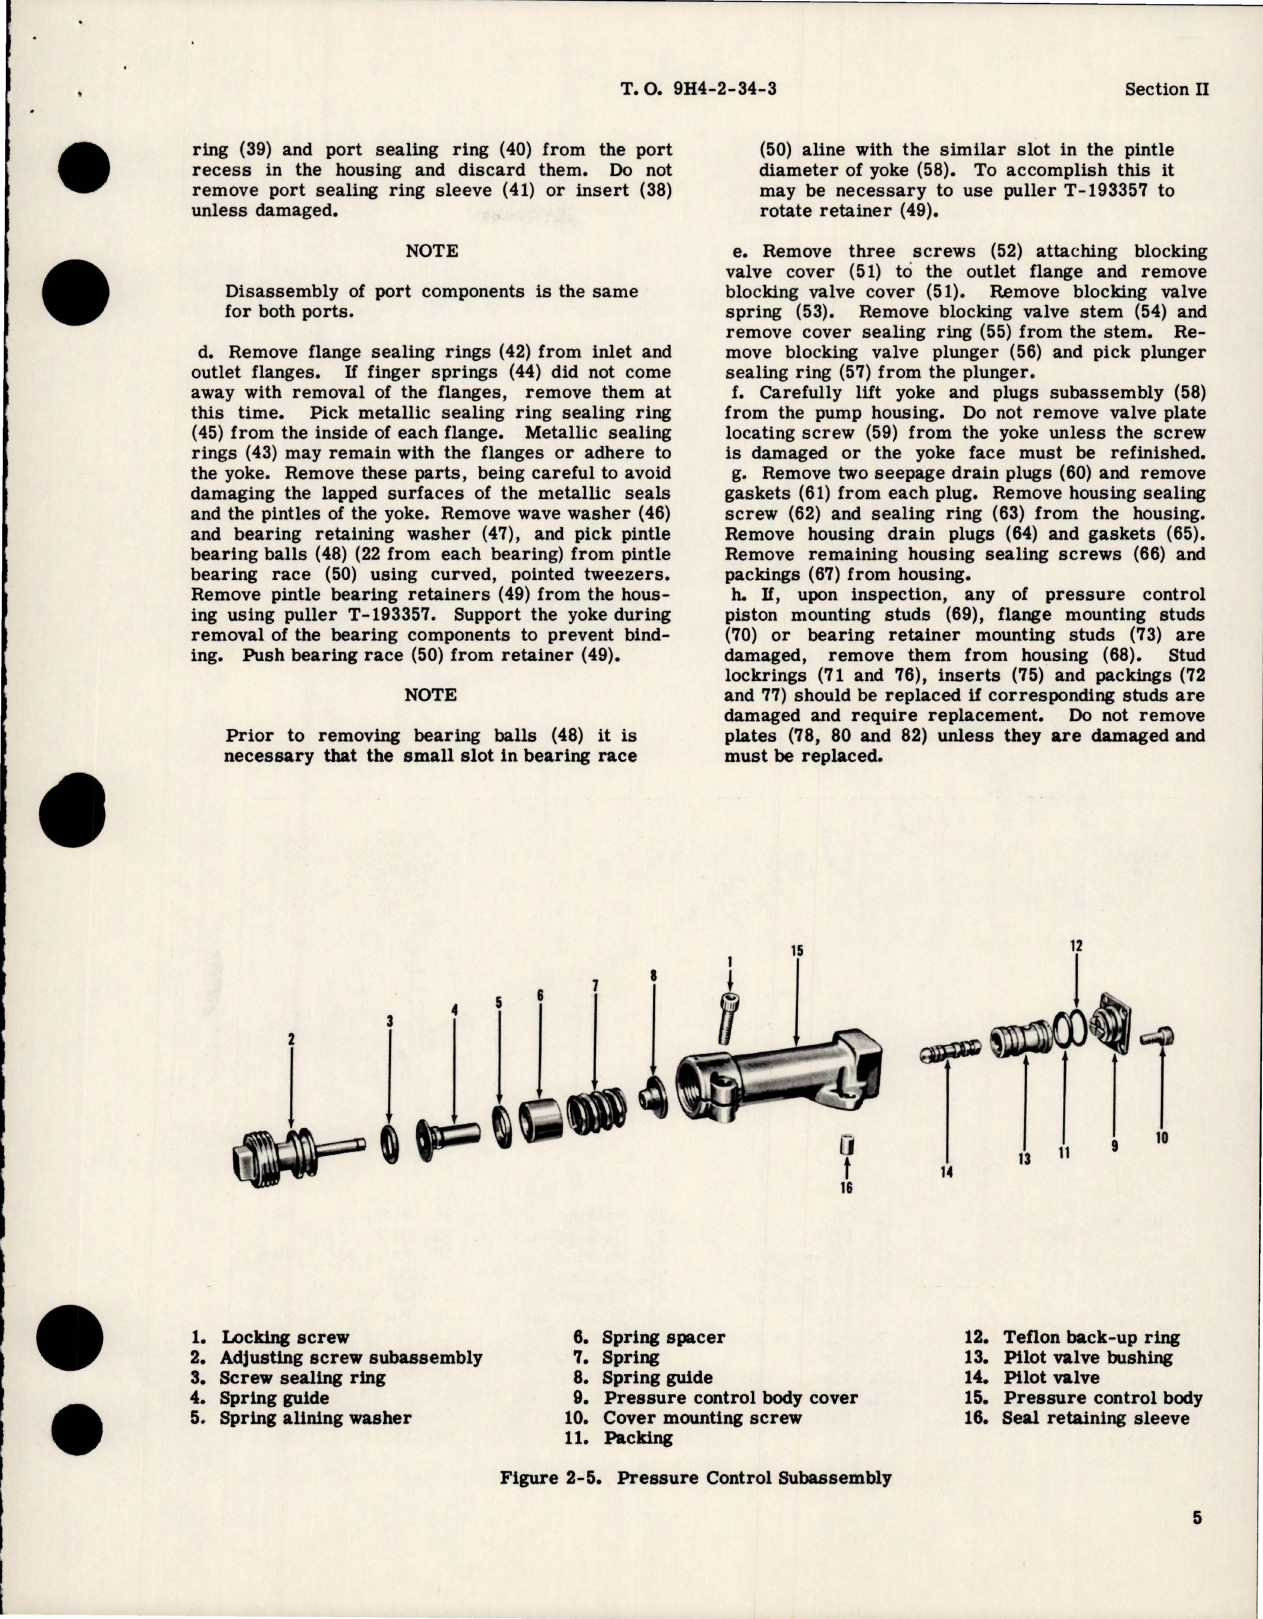 Sample page 9 from AirCorps Library document: Overhaul Instructions for Electrically Depressurized Variable Displacement Hydraulic Pumps - AA-61450 Series 